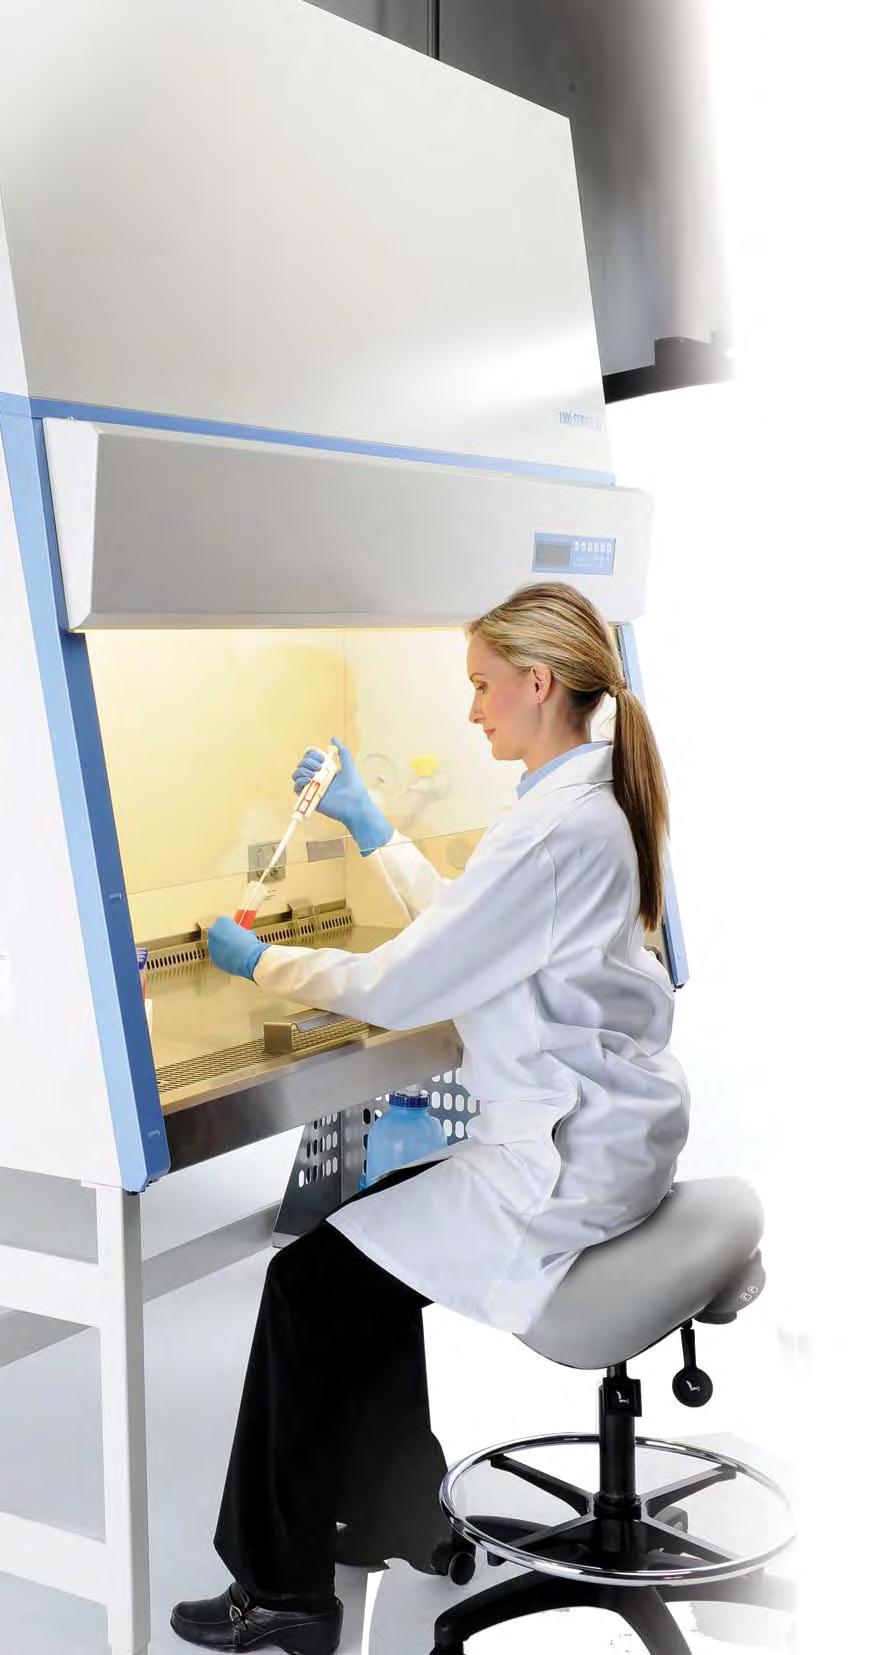 designed for comfort and Thermo BSCs offer an efficient workspace, improved ergonomics, and added conveniences that provide the user greater productivity and ultimately, better laboratory results.